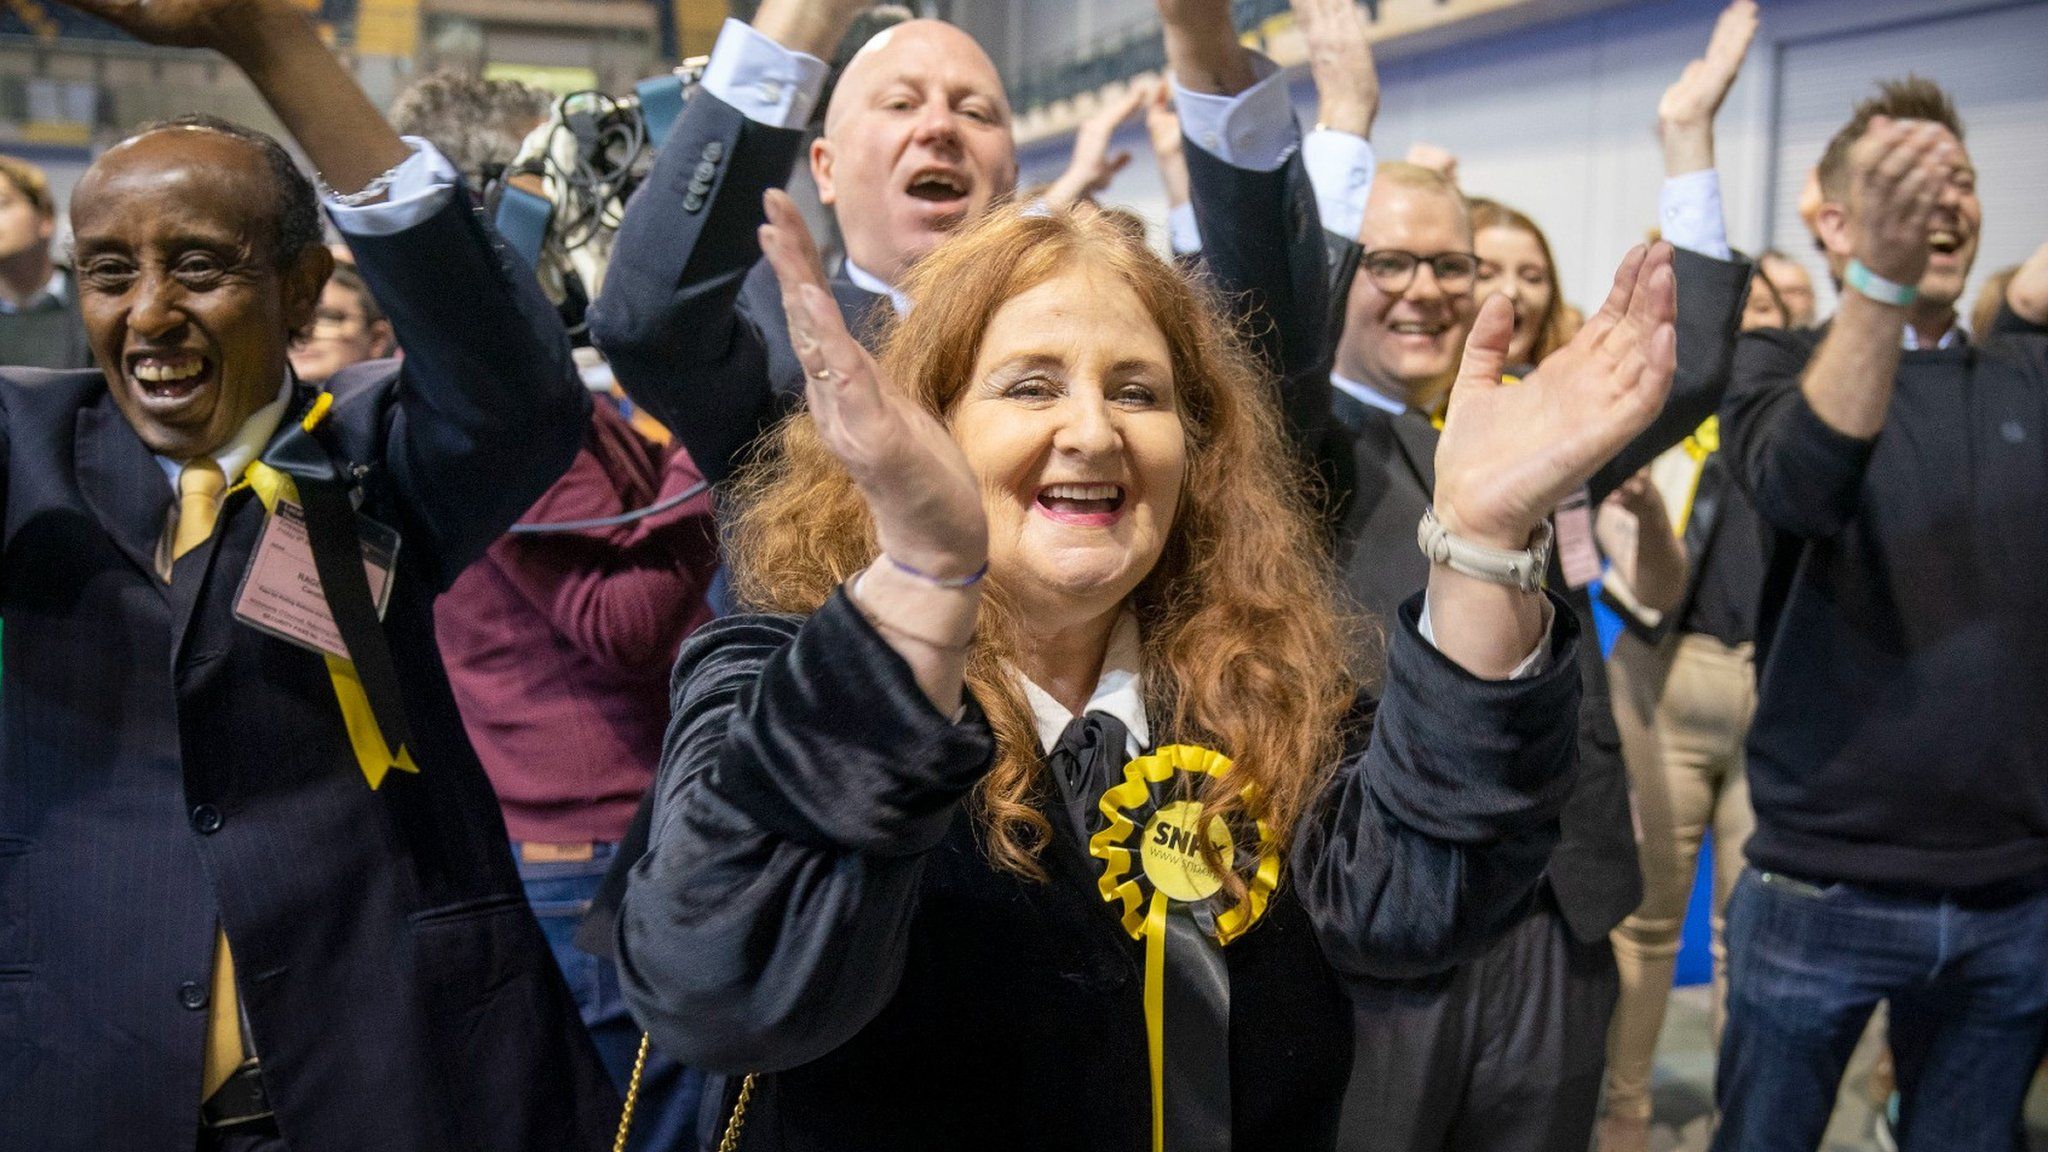 SNP supporters in Glasgow